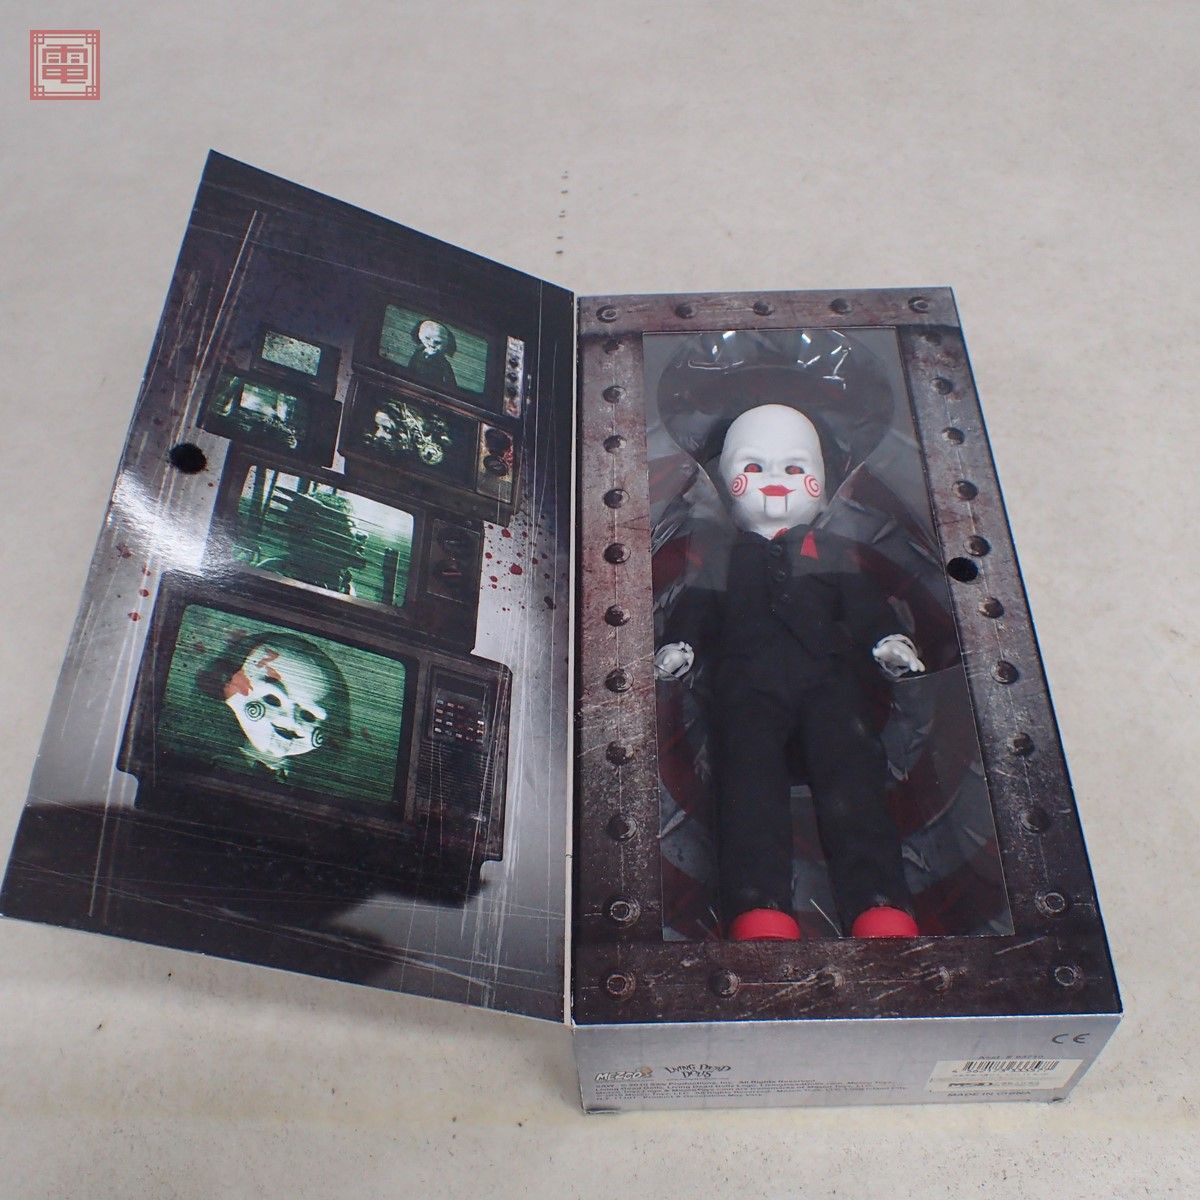 mezko living dead doll saw jig saw /THE LOST IN OZ THE WITCH etc. together 6 point set MEZCO LIVING DEAD DOLLS[40